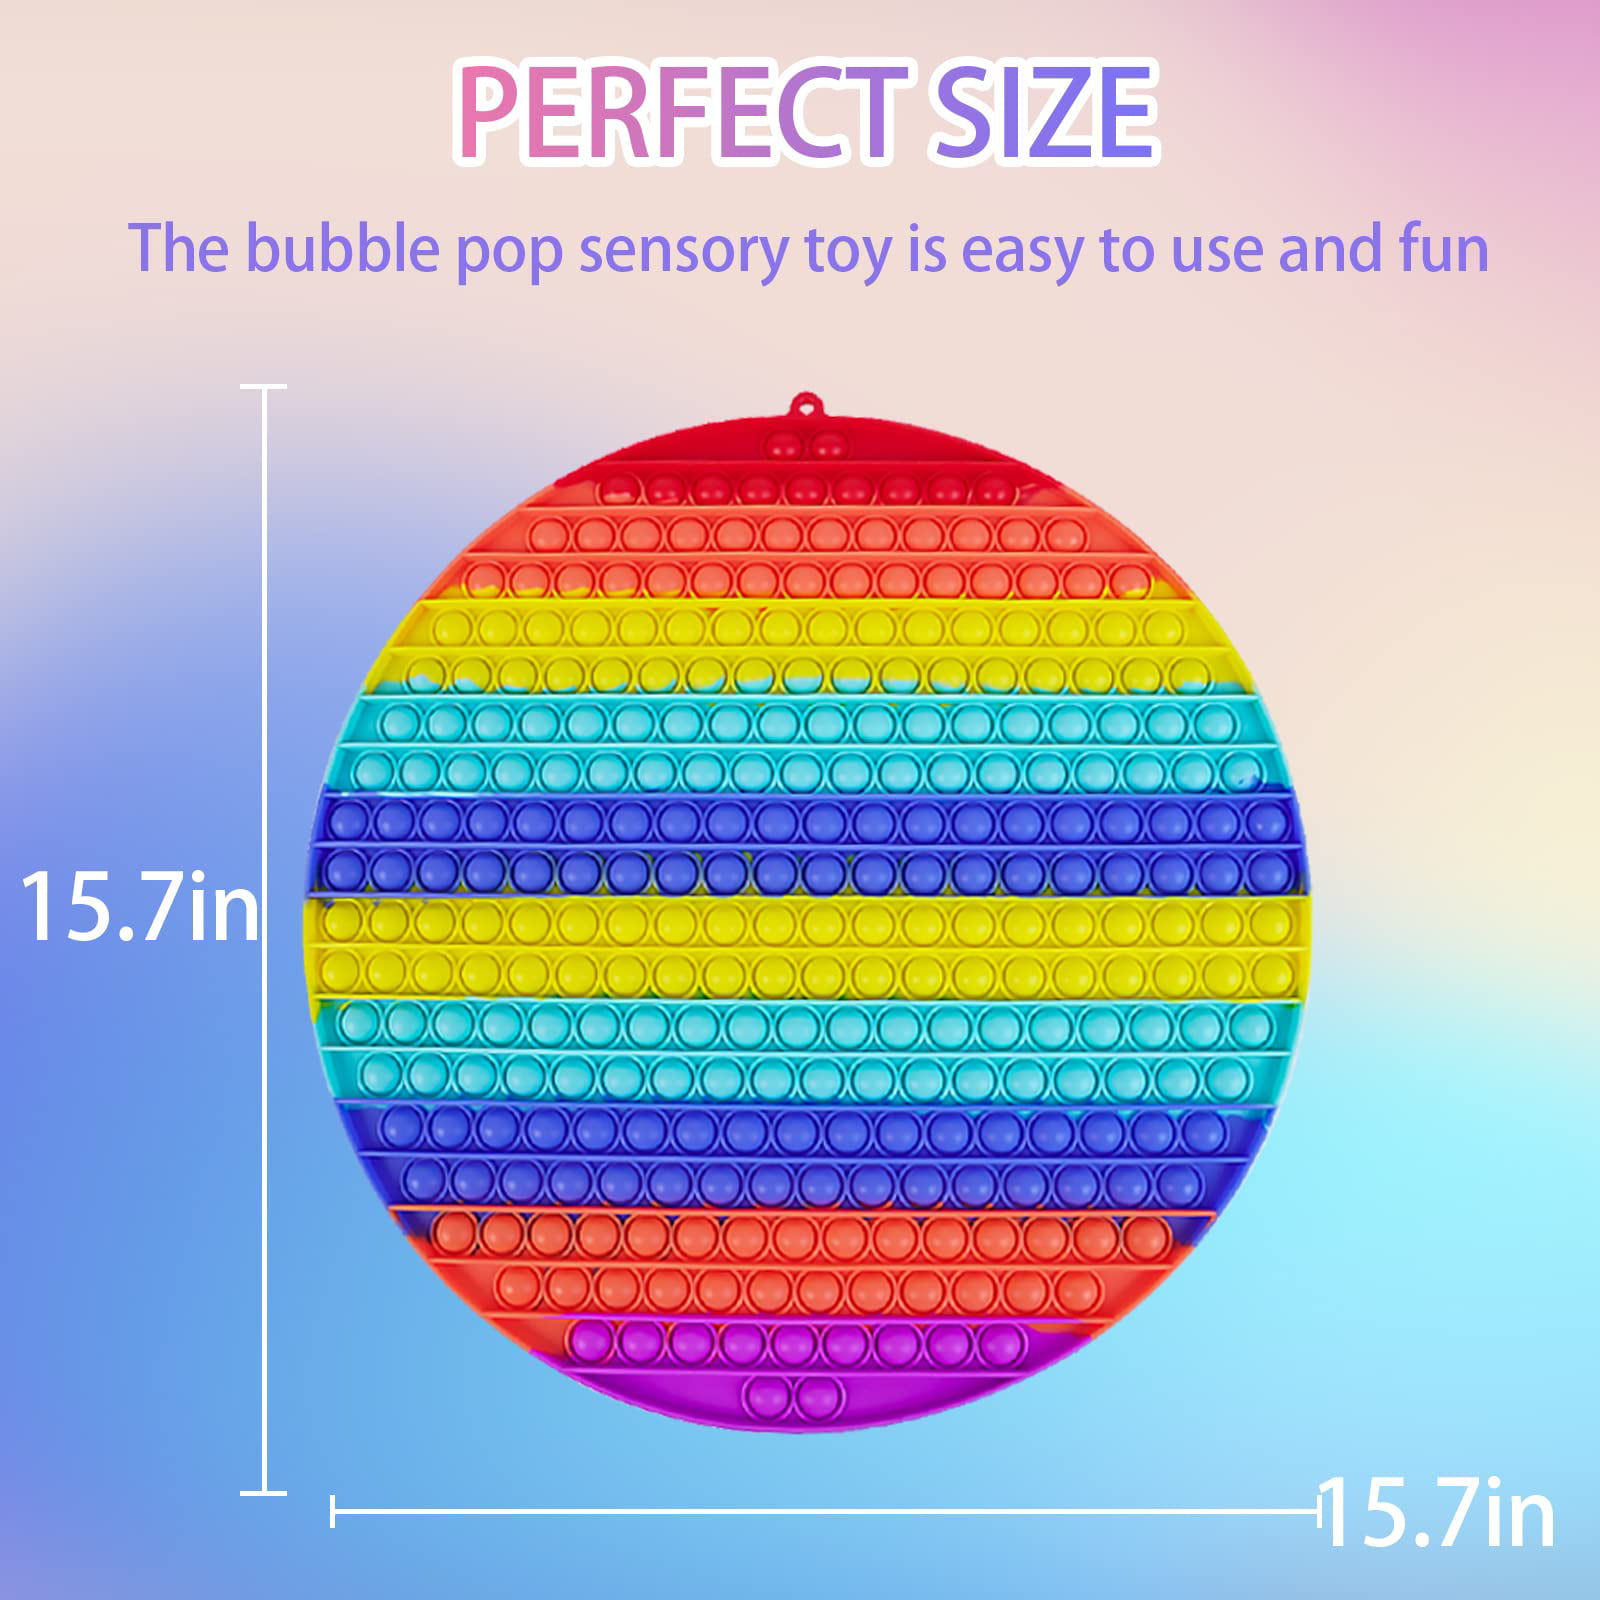 Maior Jumbo Enorme Pops Poppers It Sensory Bubble Cute Toy, Super Big Extra  Giant Really Large Popping, 200 400 1000 XL Gigantesco Push Popit Popet